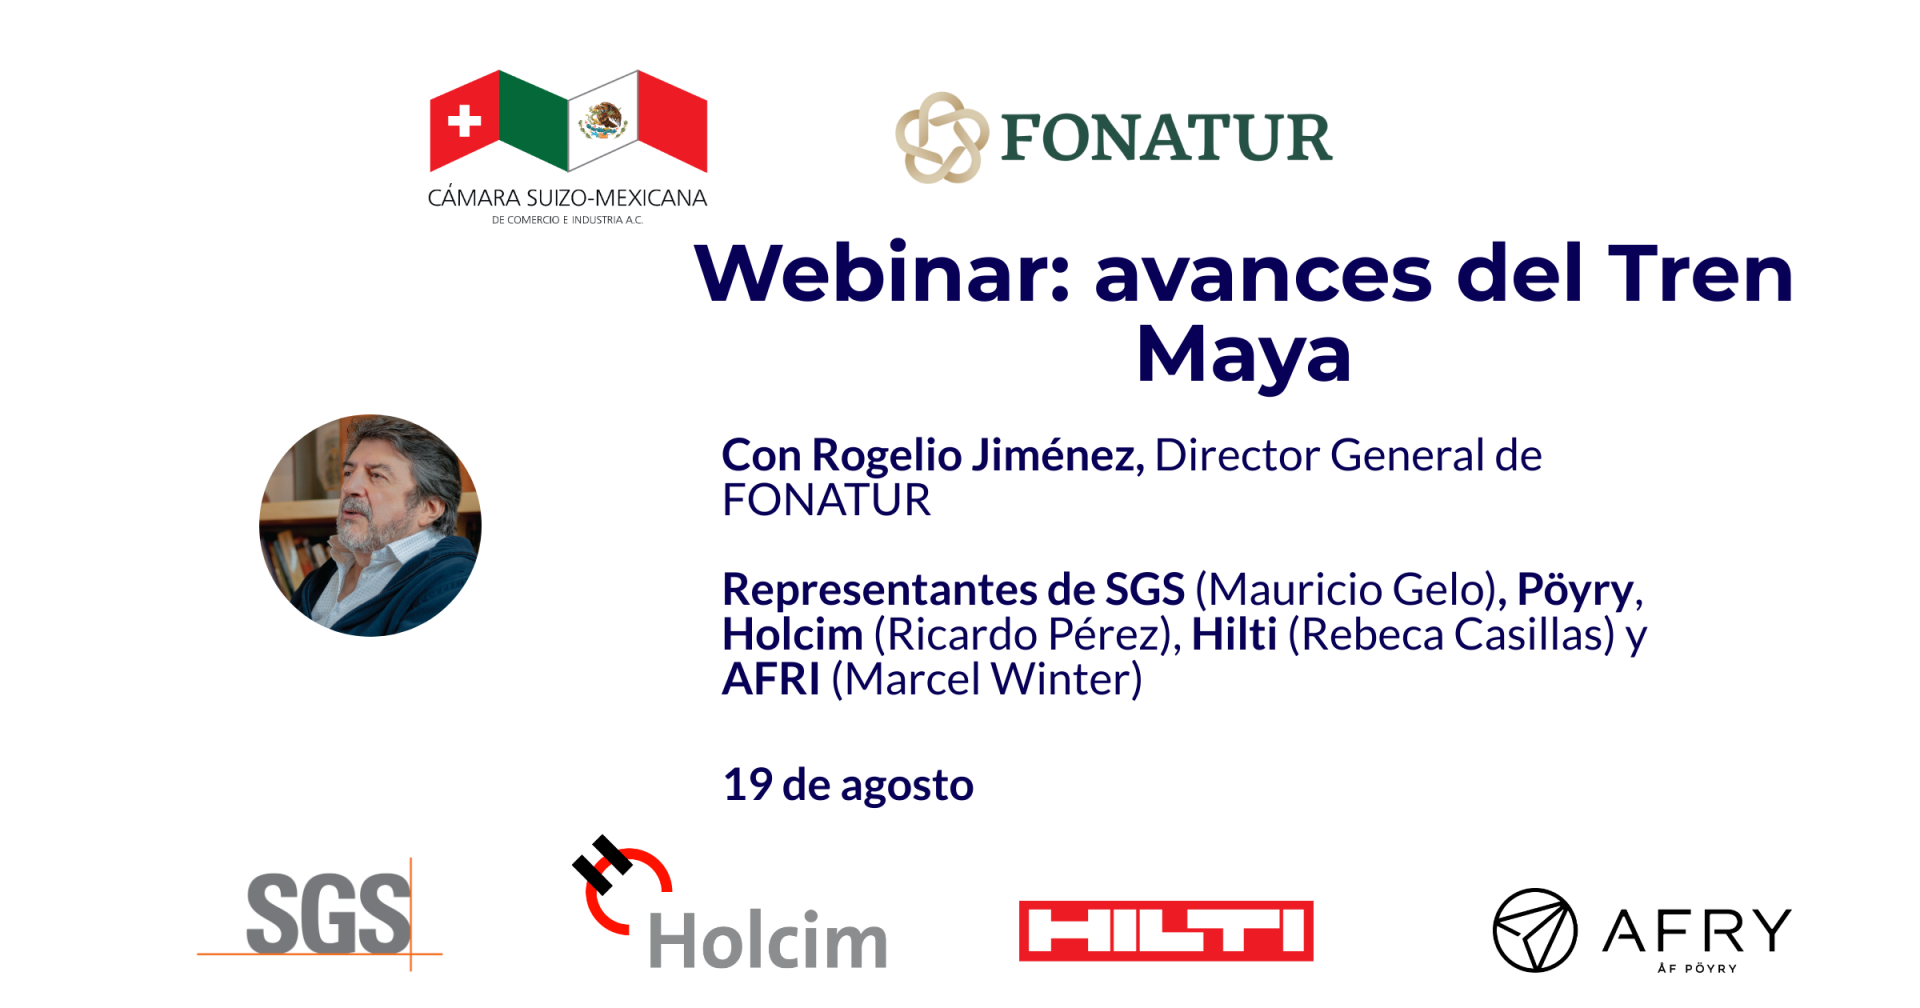 Progress of the Mayan Train with the Managing Director of FONATUR